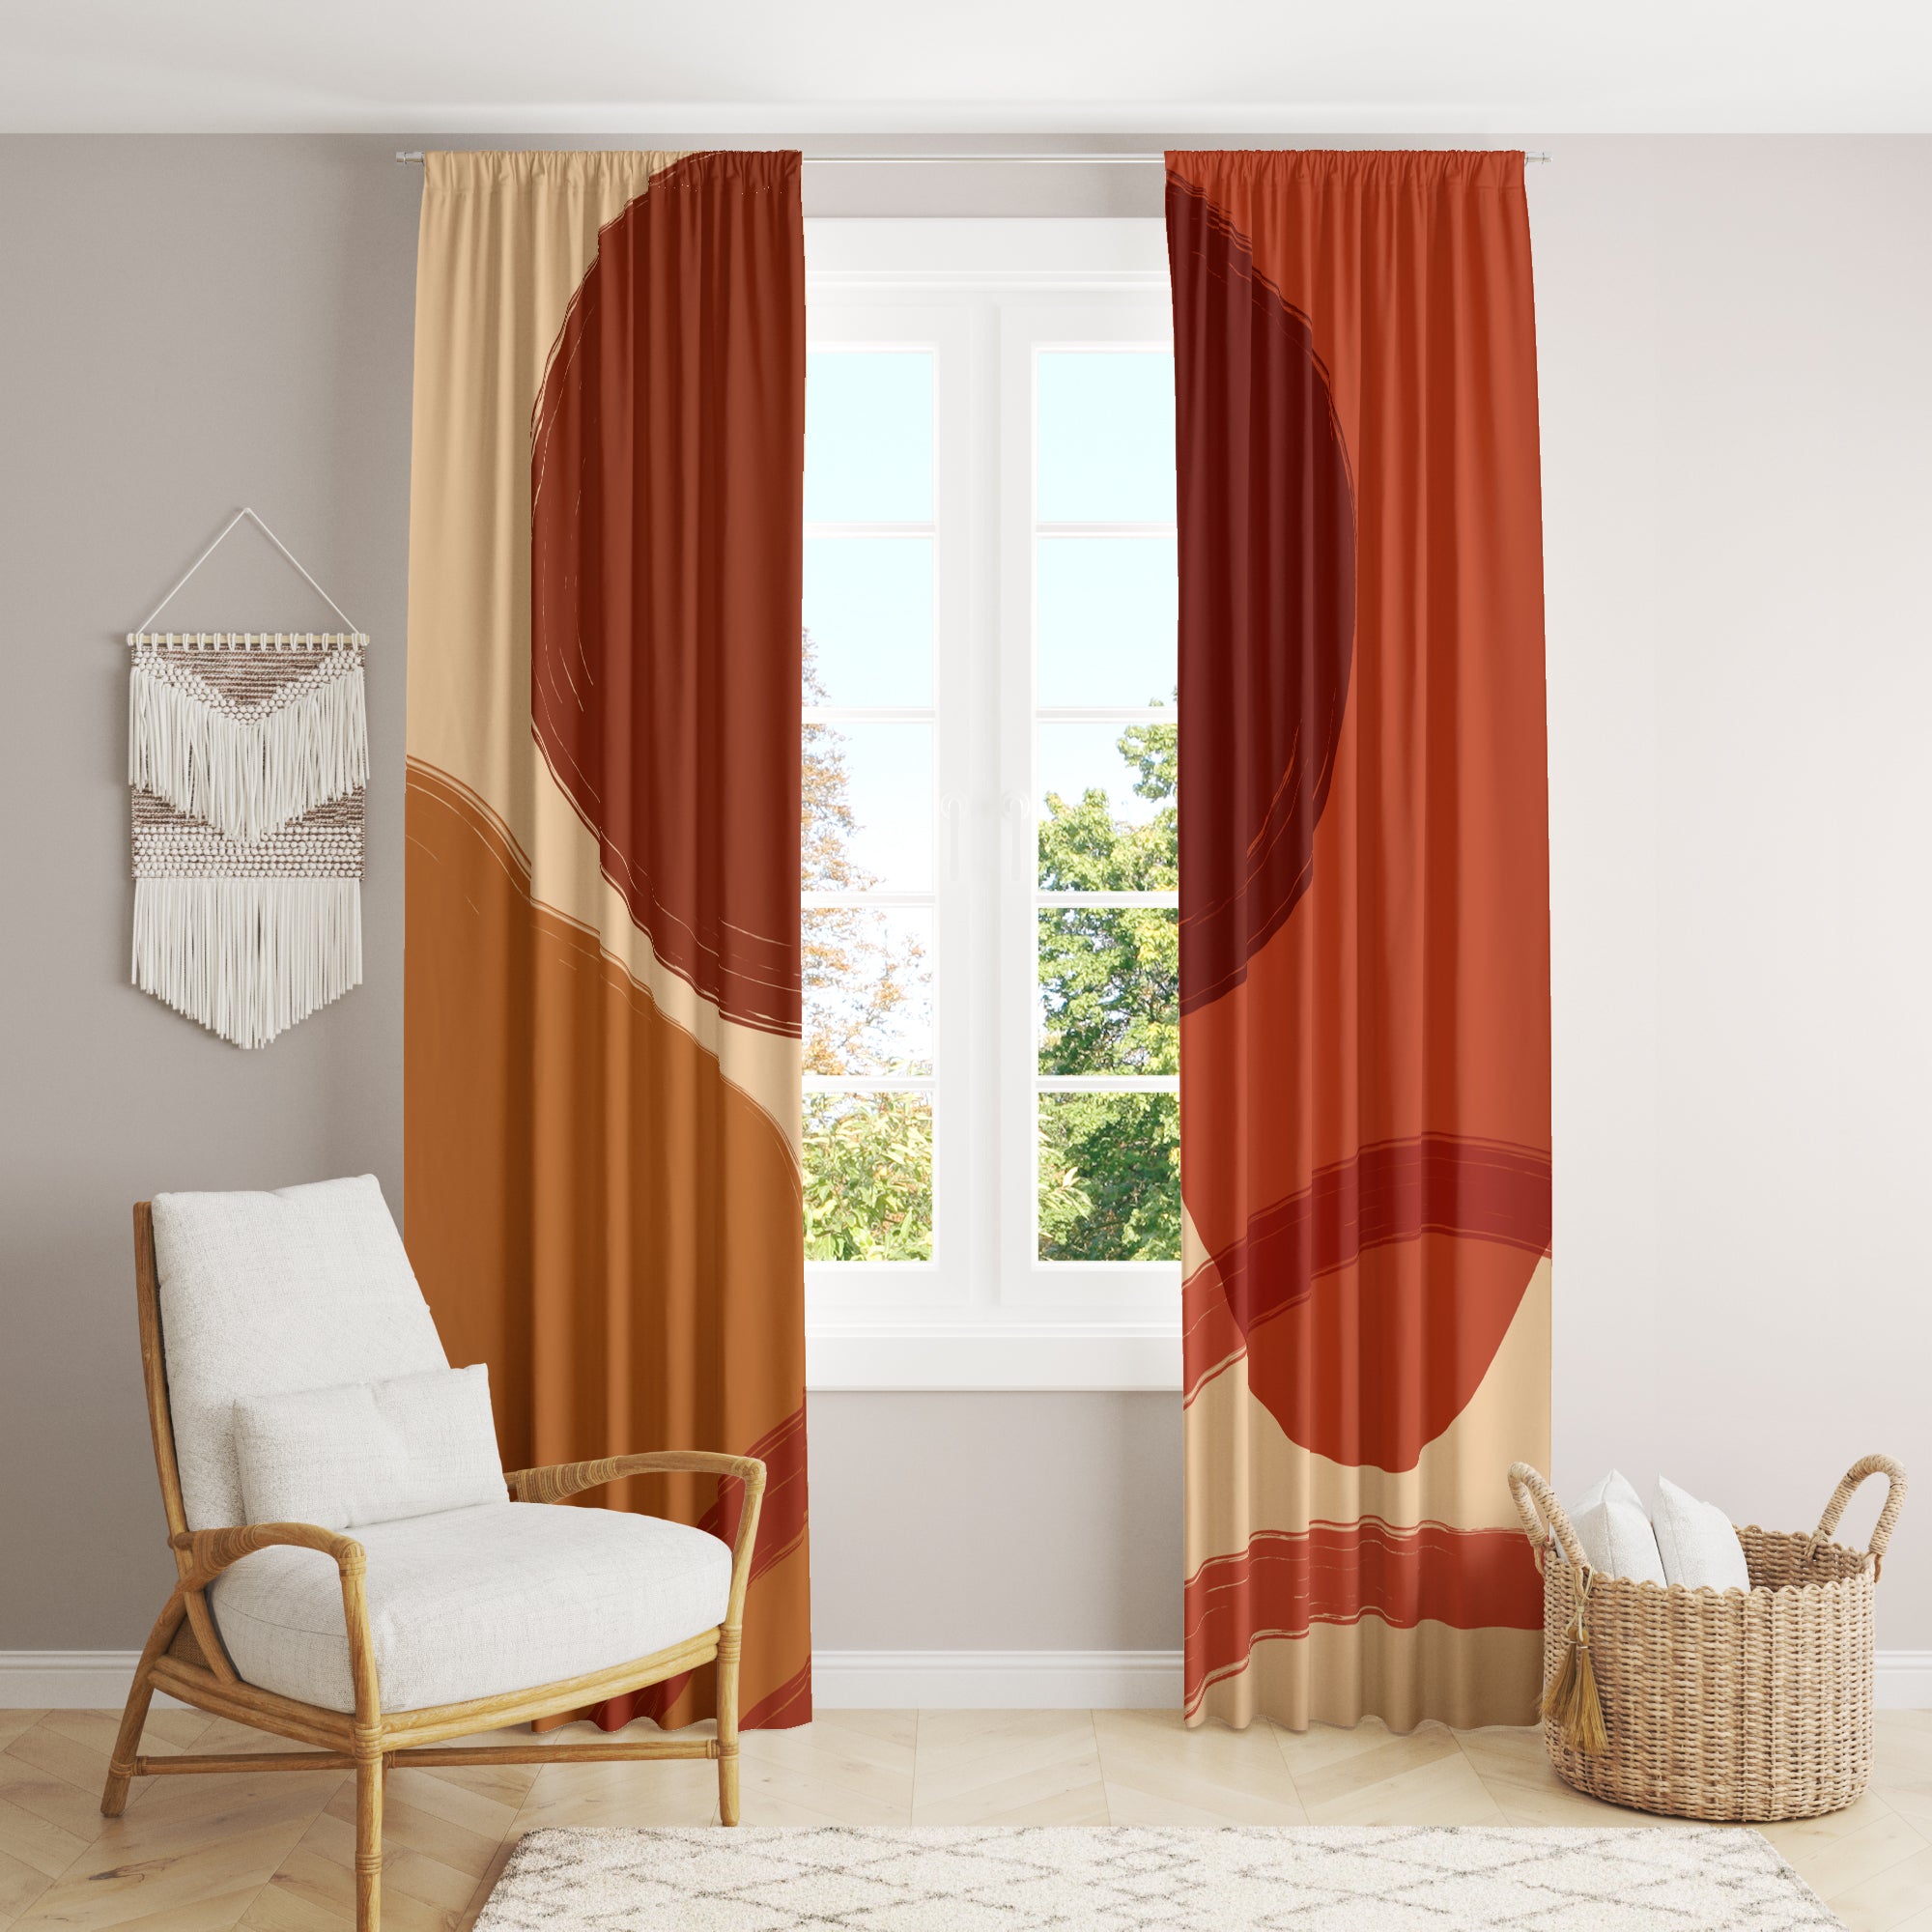 Warm Red Tones Terracotta Mid Century Modern Blackout Window Curtains FLORENCE - 2 Panels